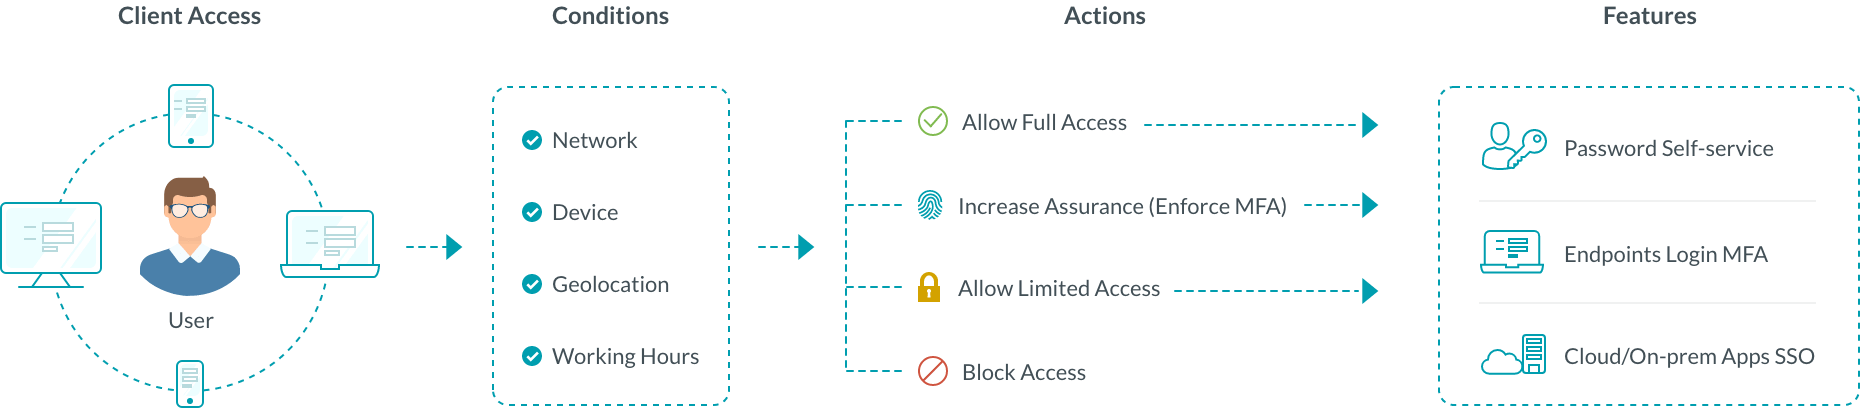 conditional-access-policy